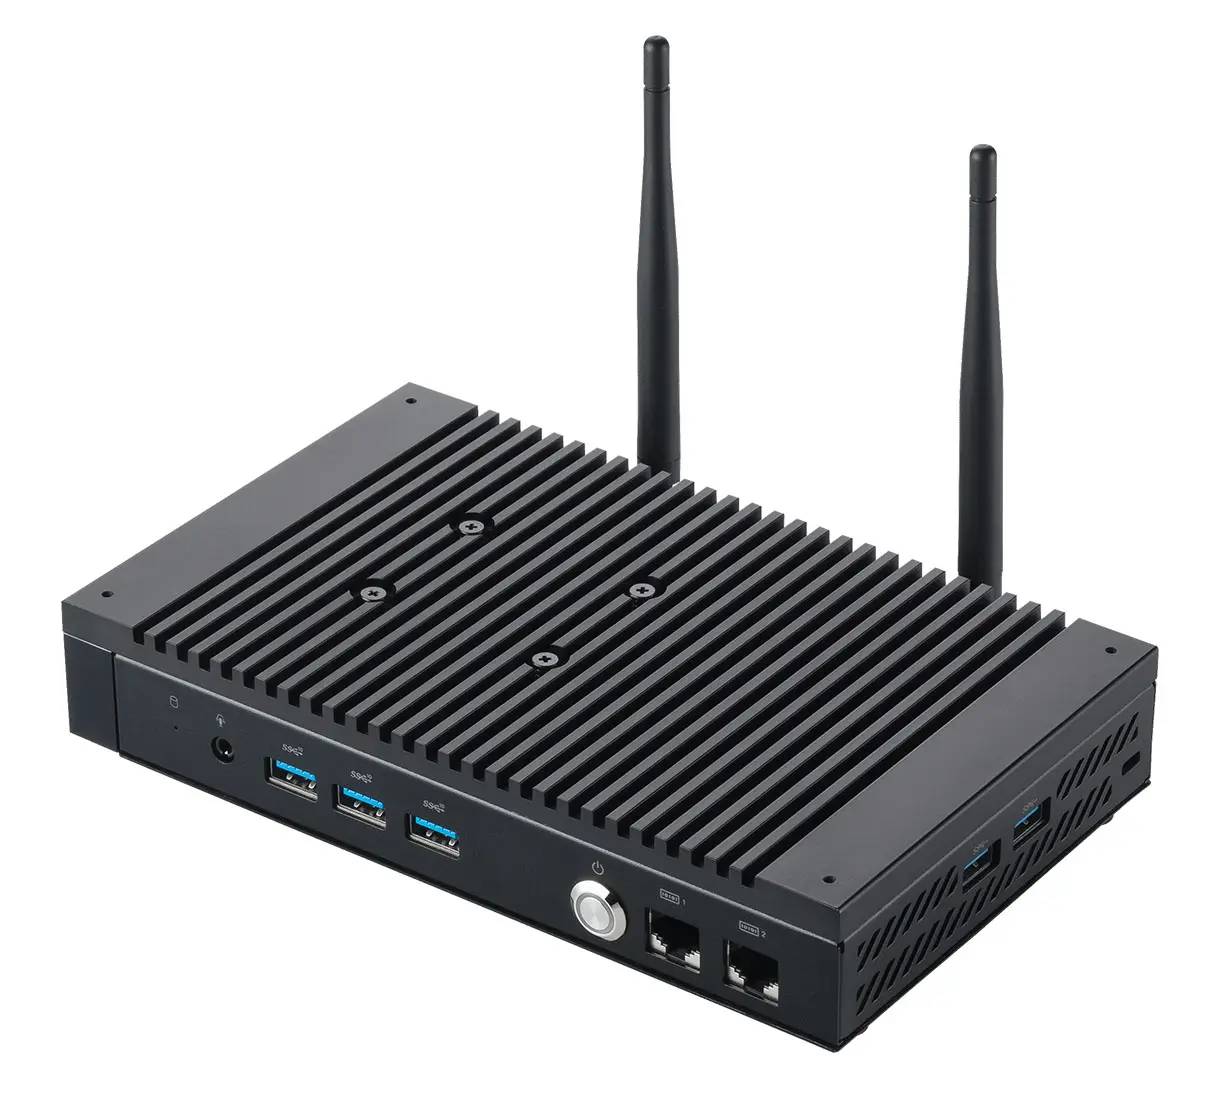 Asus PL64 Mini PC: An Ideal Device for Home Users